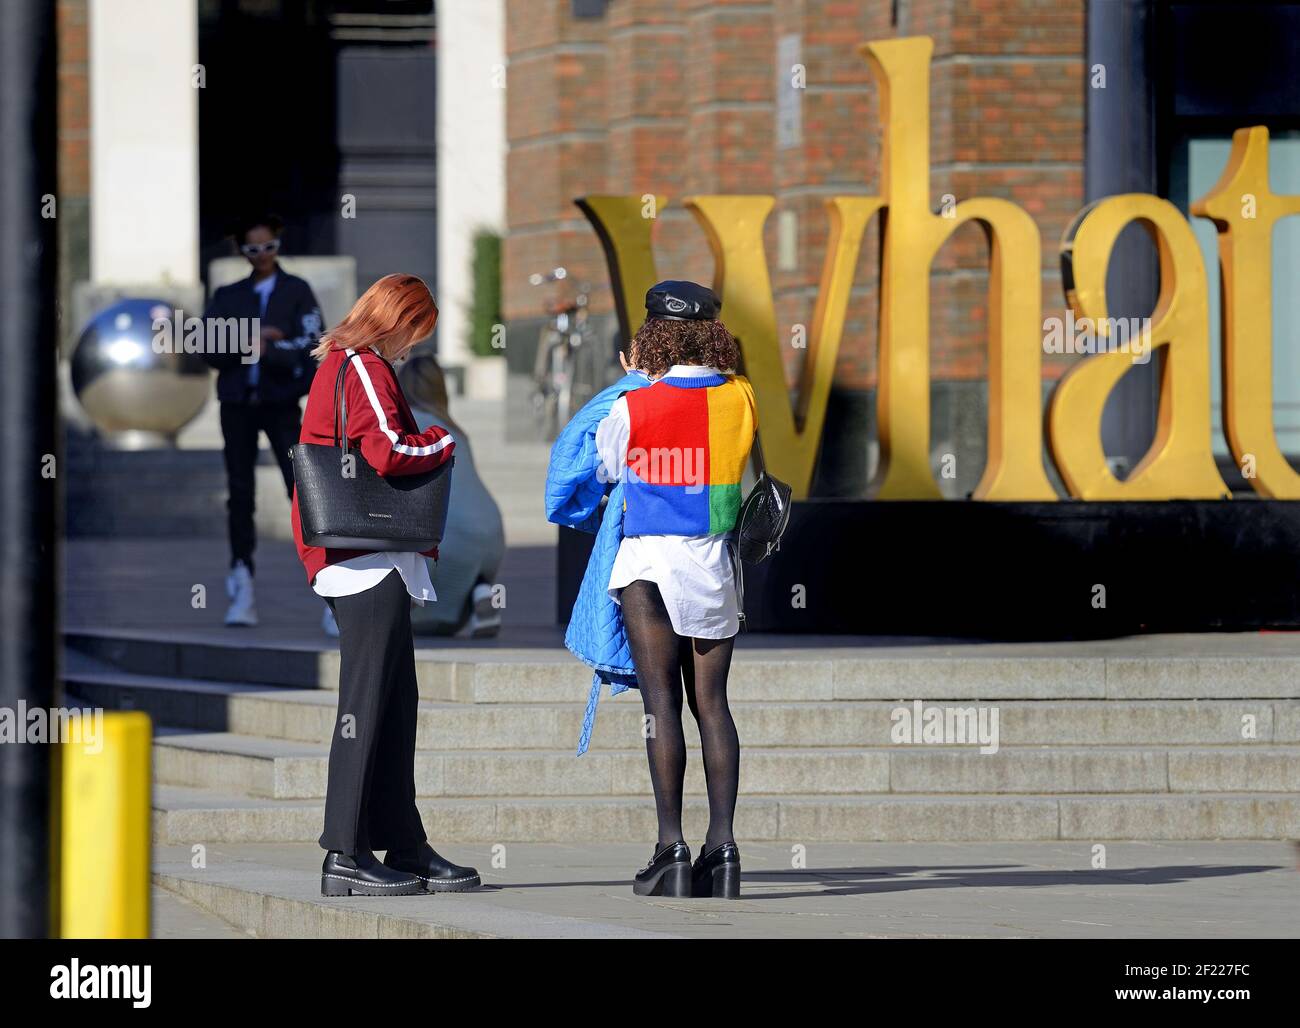 London, England, UK. Brightly-dressed young woman photographing an art installation near St Paul's Cathedral Stock Photo